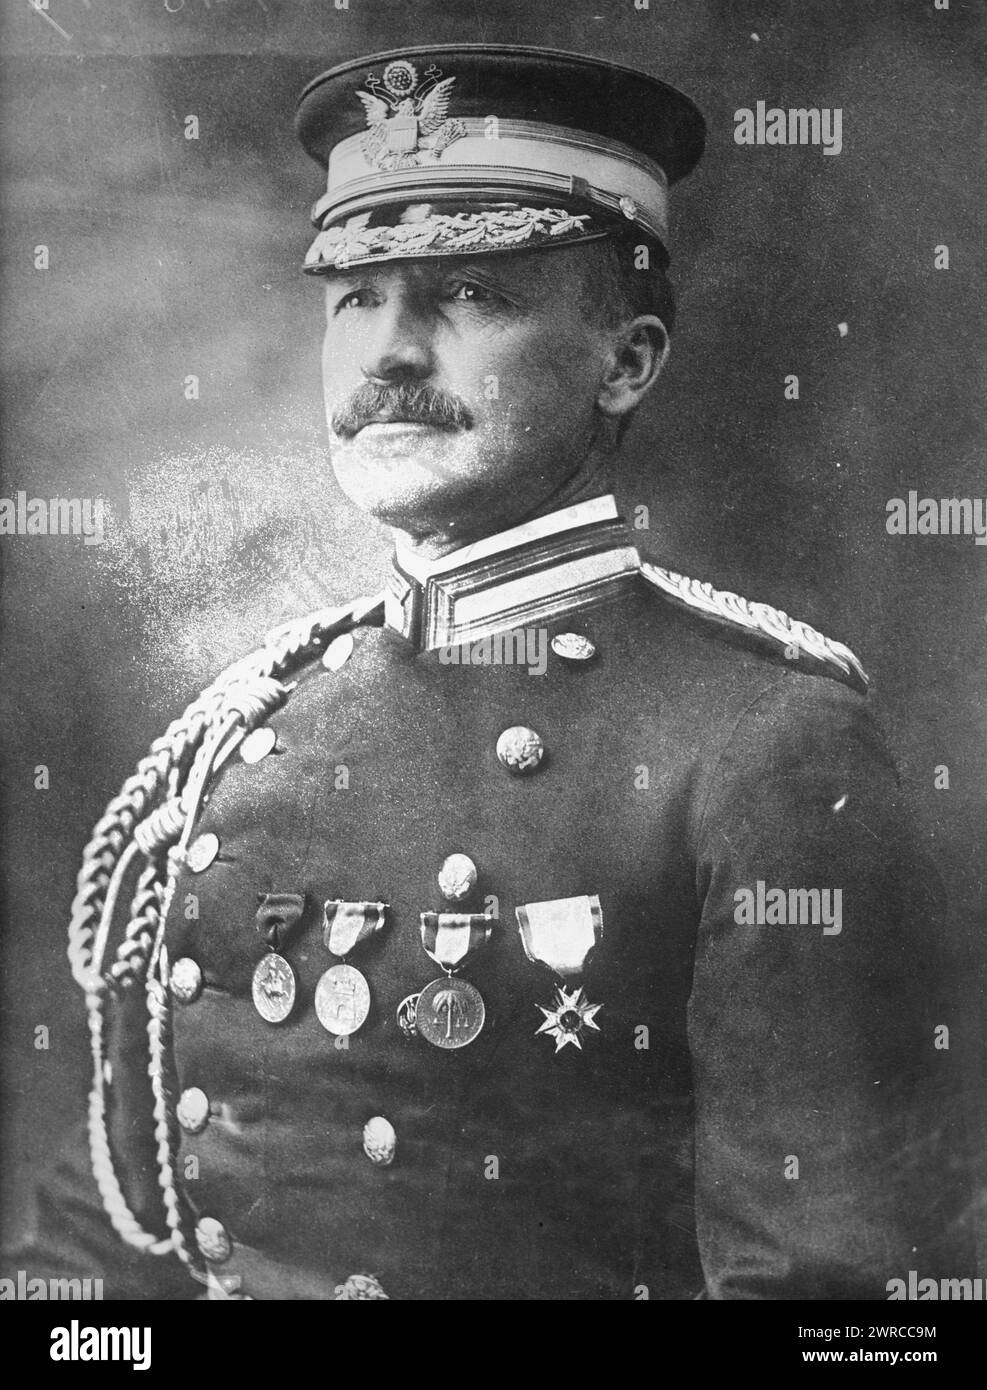 Gen. U.G. McAlexander, Photograph shows Major General Ulysses Grant McAlexander (1864-1936) who served in the US Army., 1919 Jan. 18, Glass negatives, 1 negative: glass Stock Photo